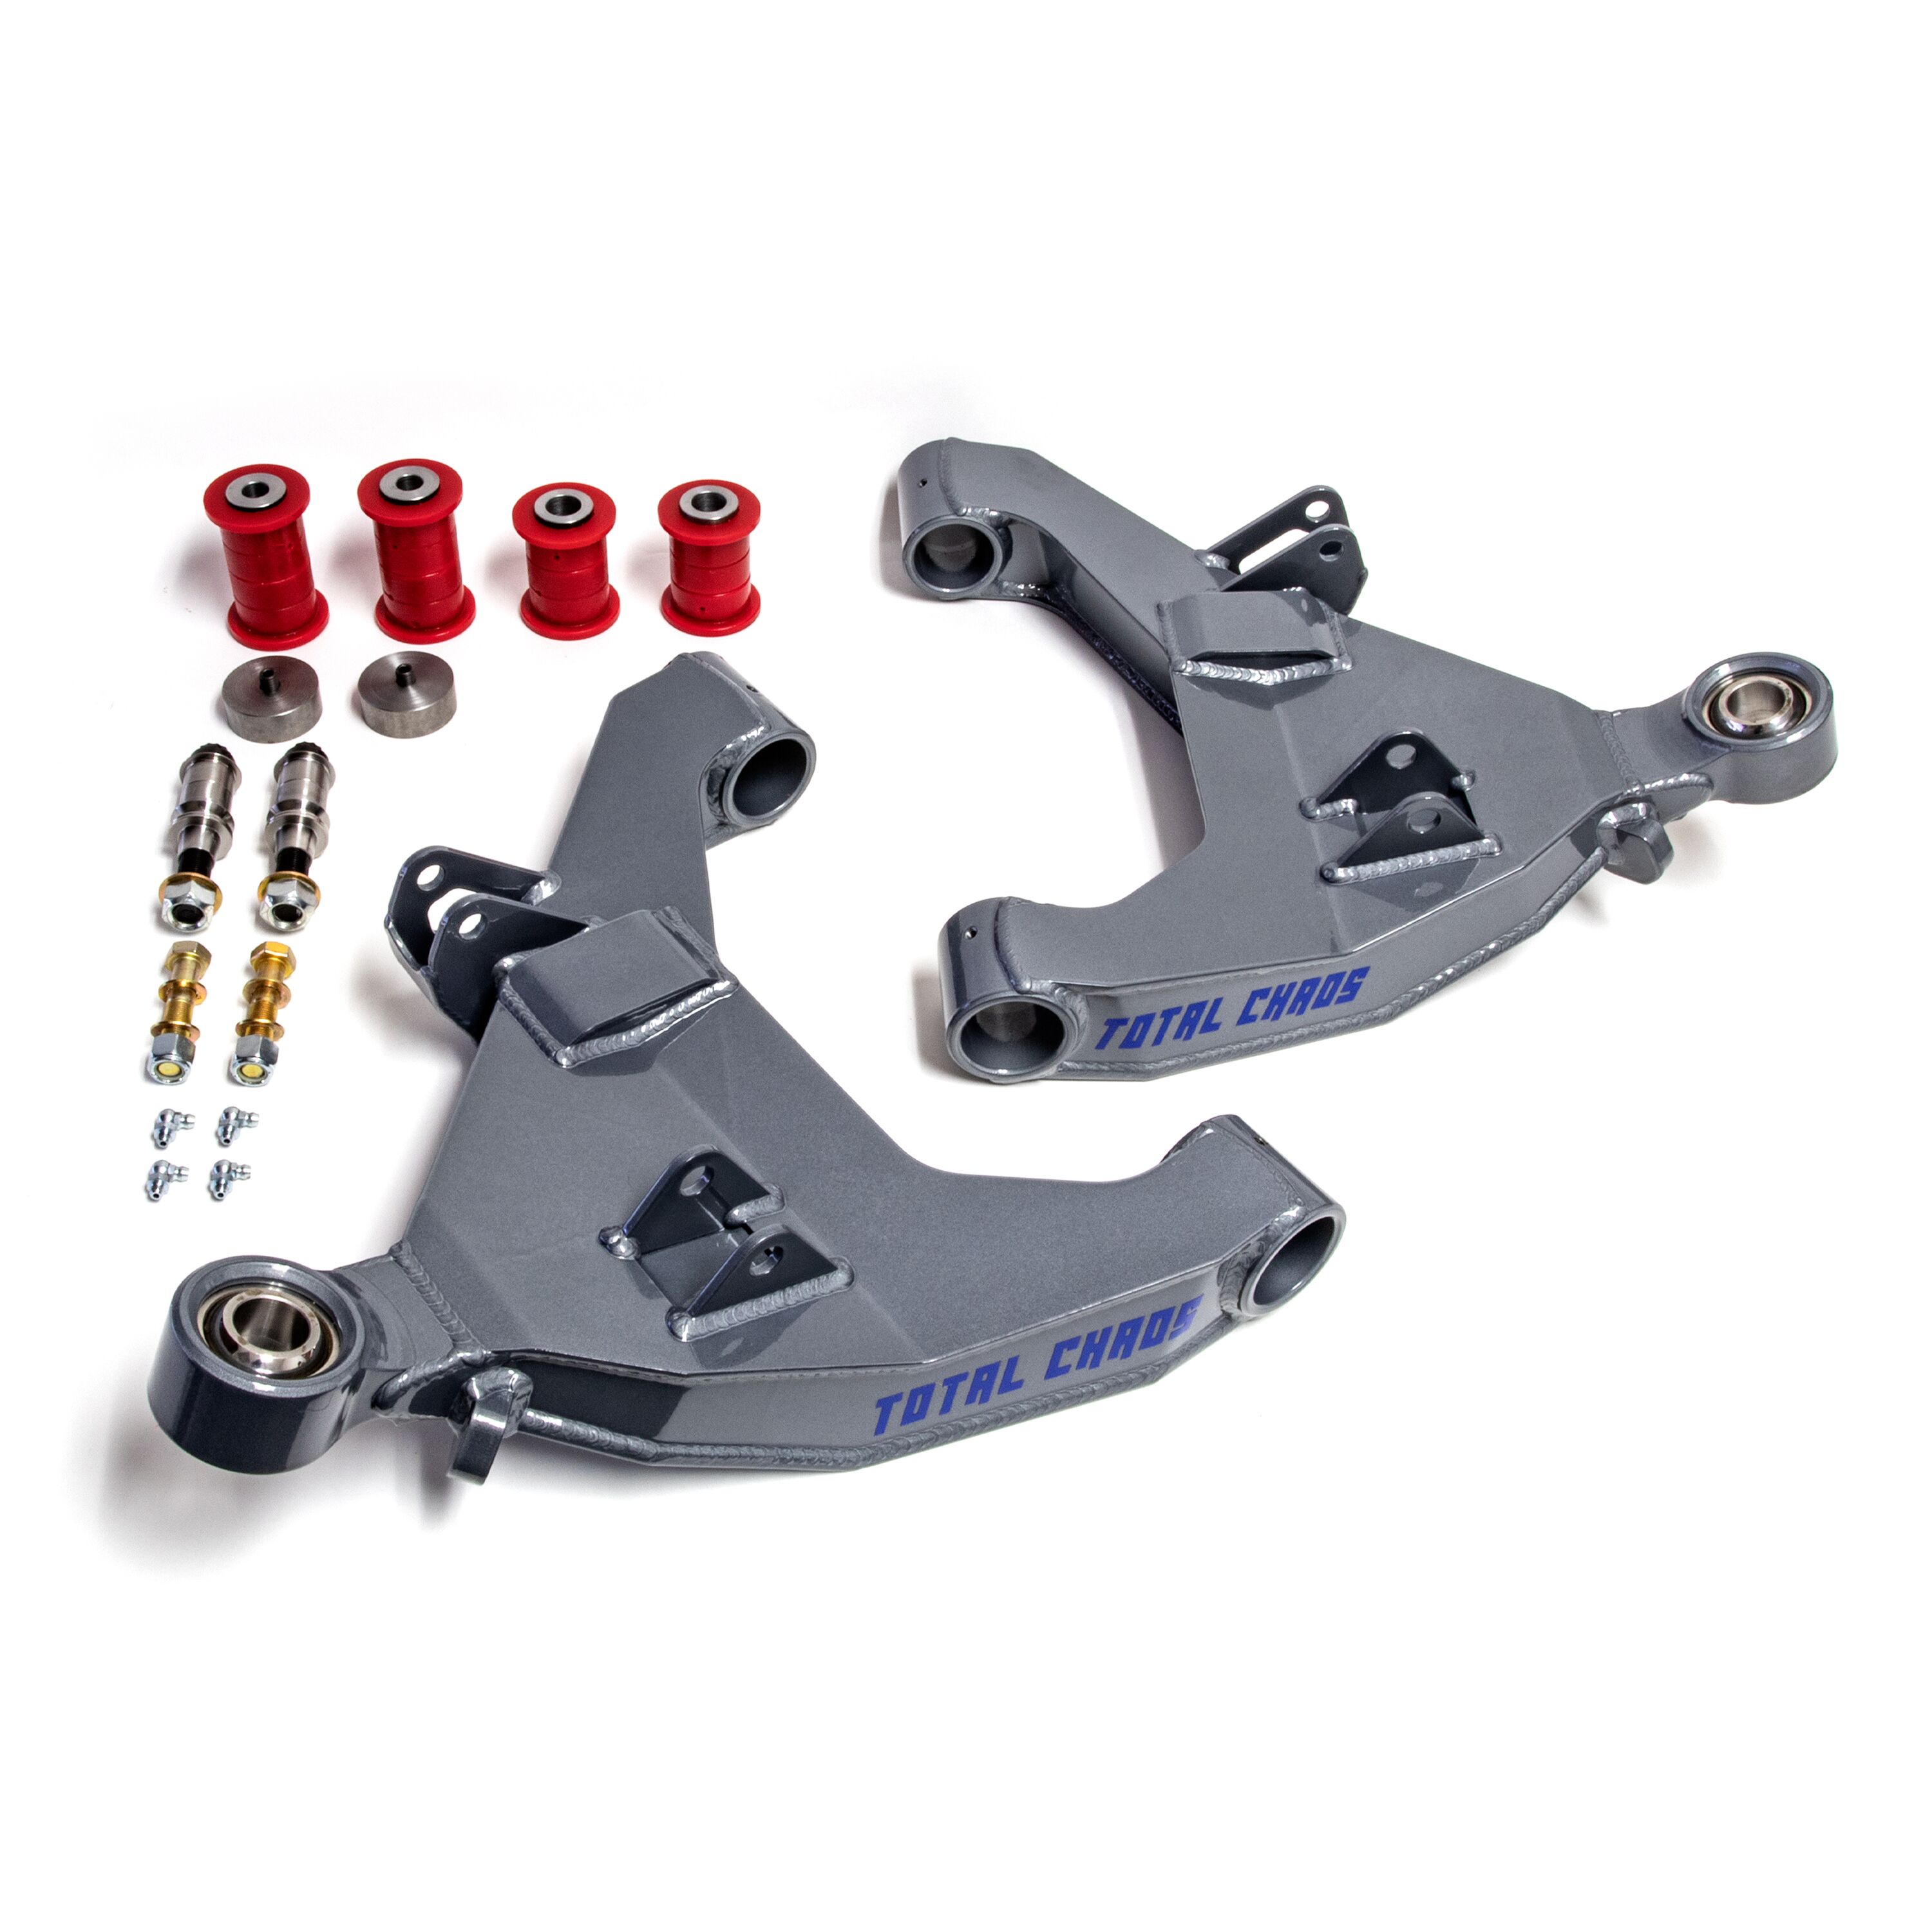 Total Chaos Stock Length 4130 Expedition Series Lower Control Arm 2010+